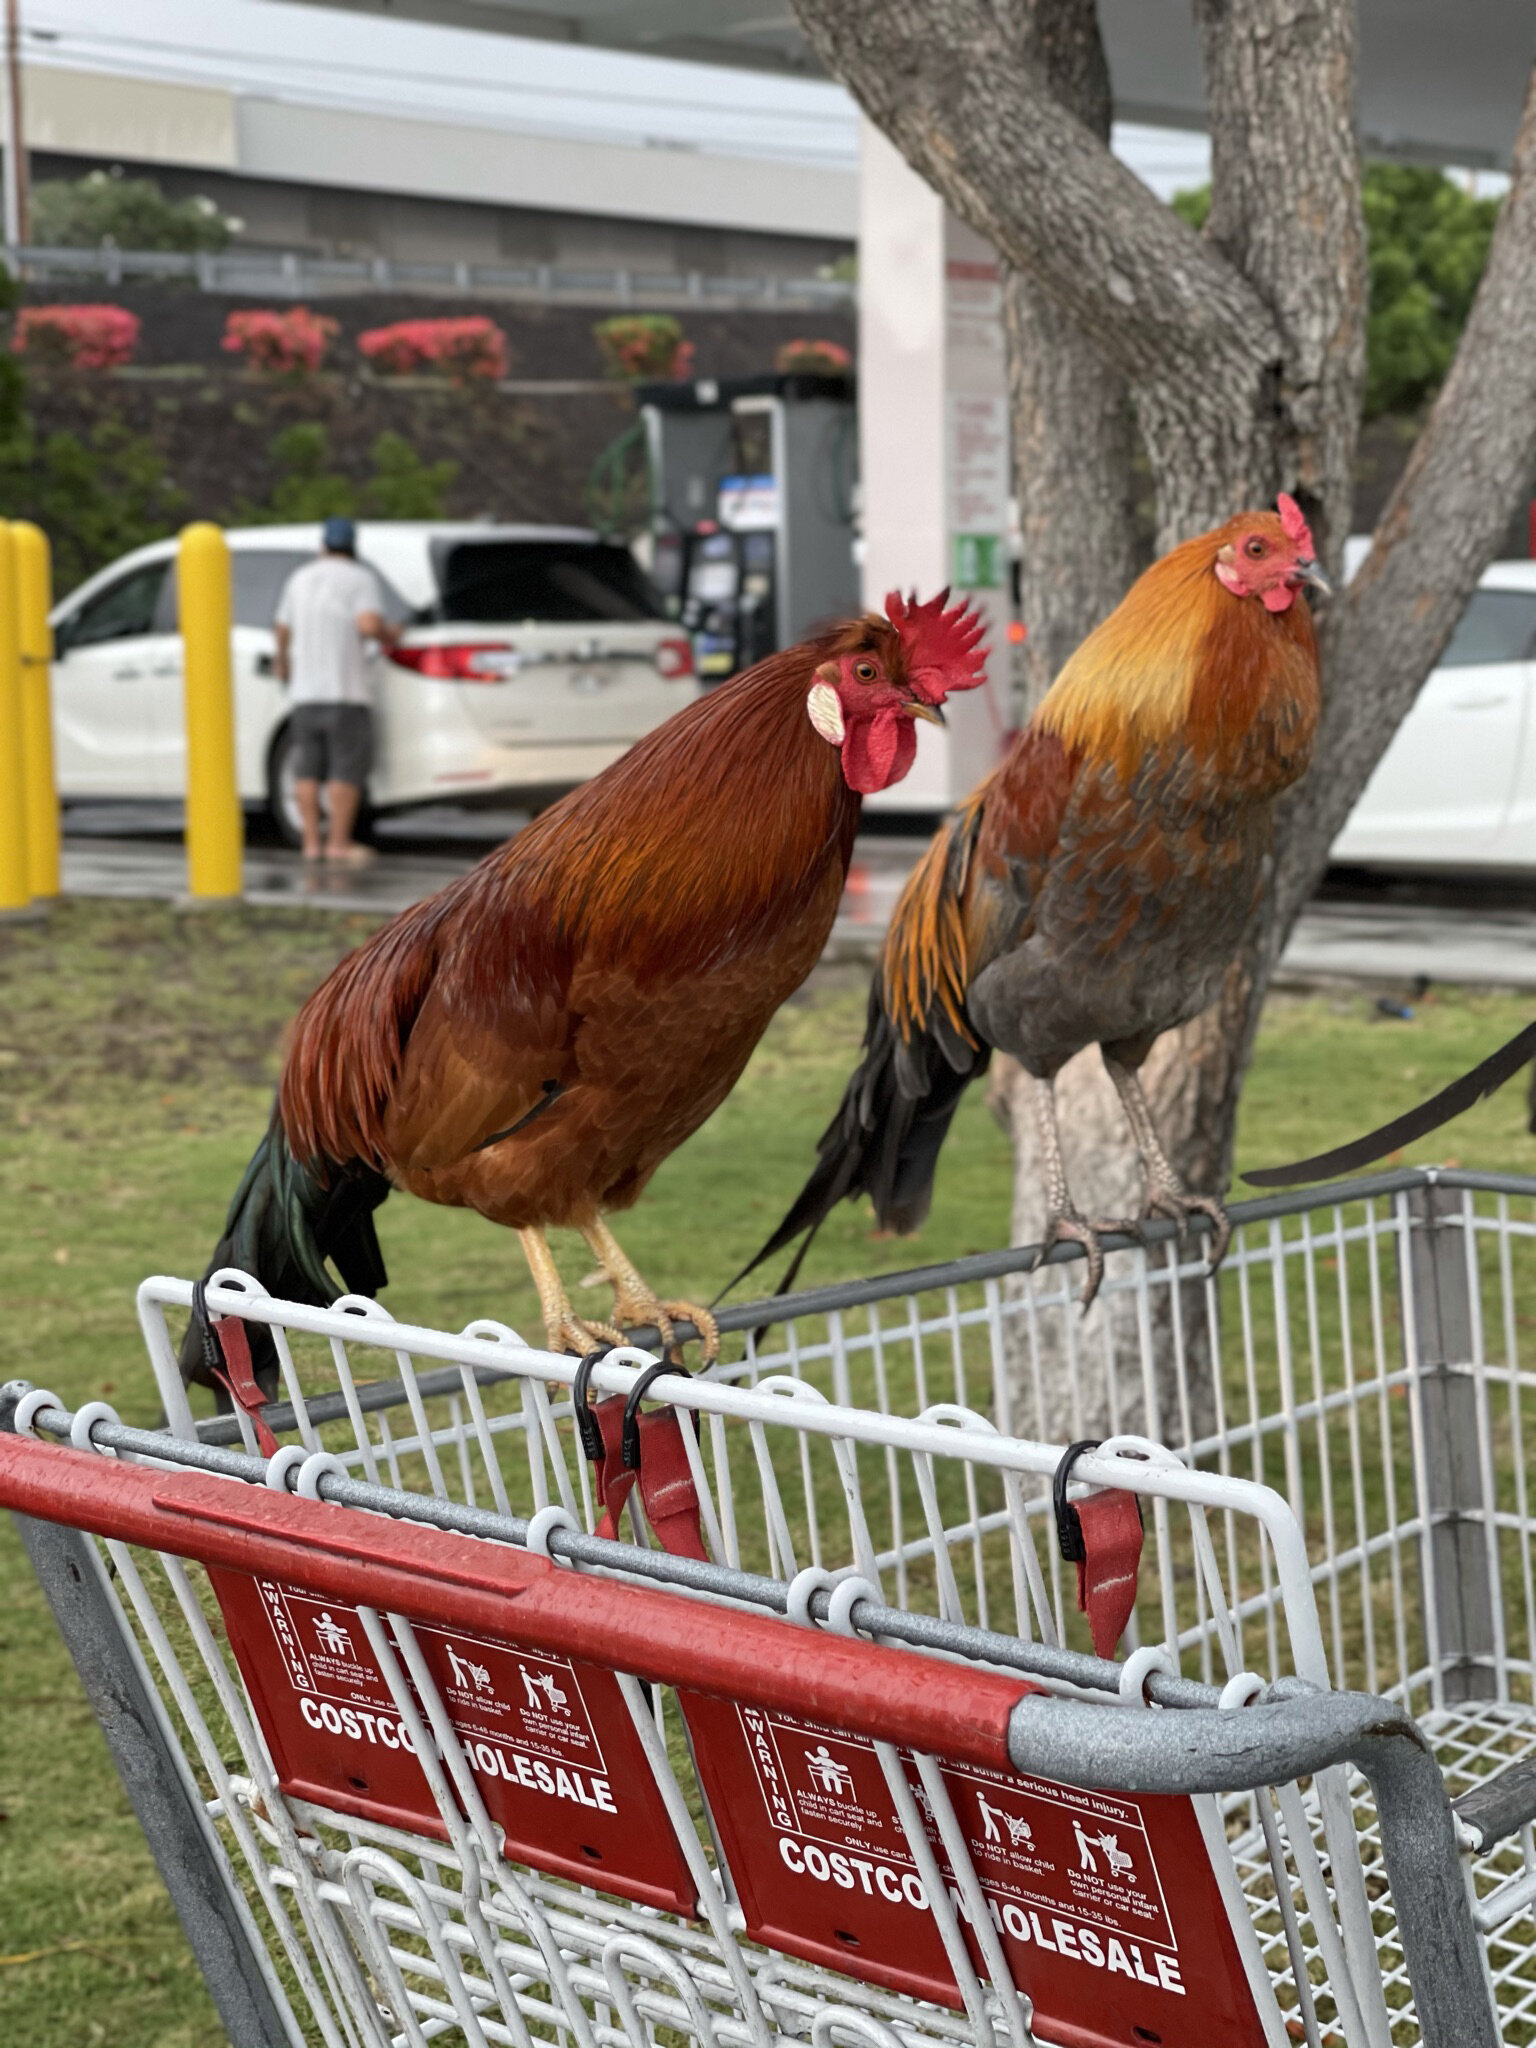 roosters everywhere - even at Costco